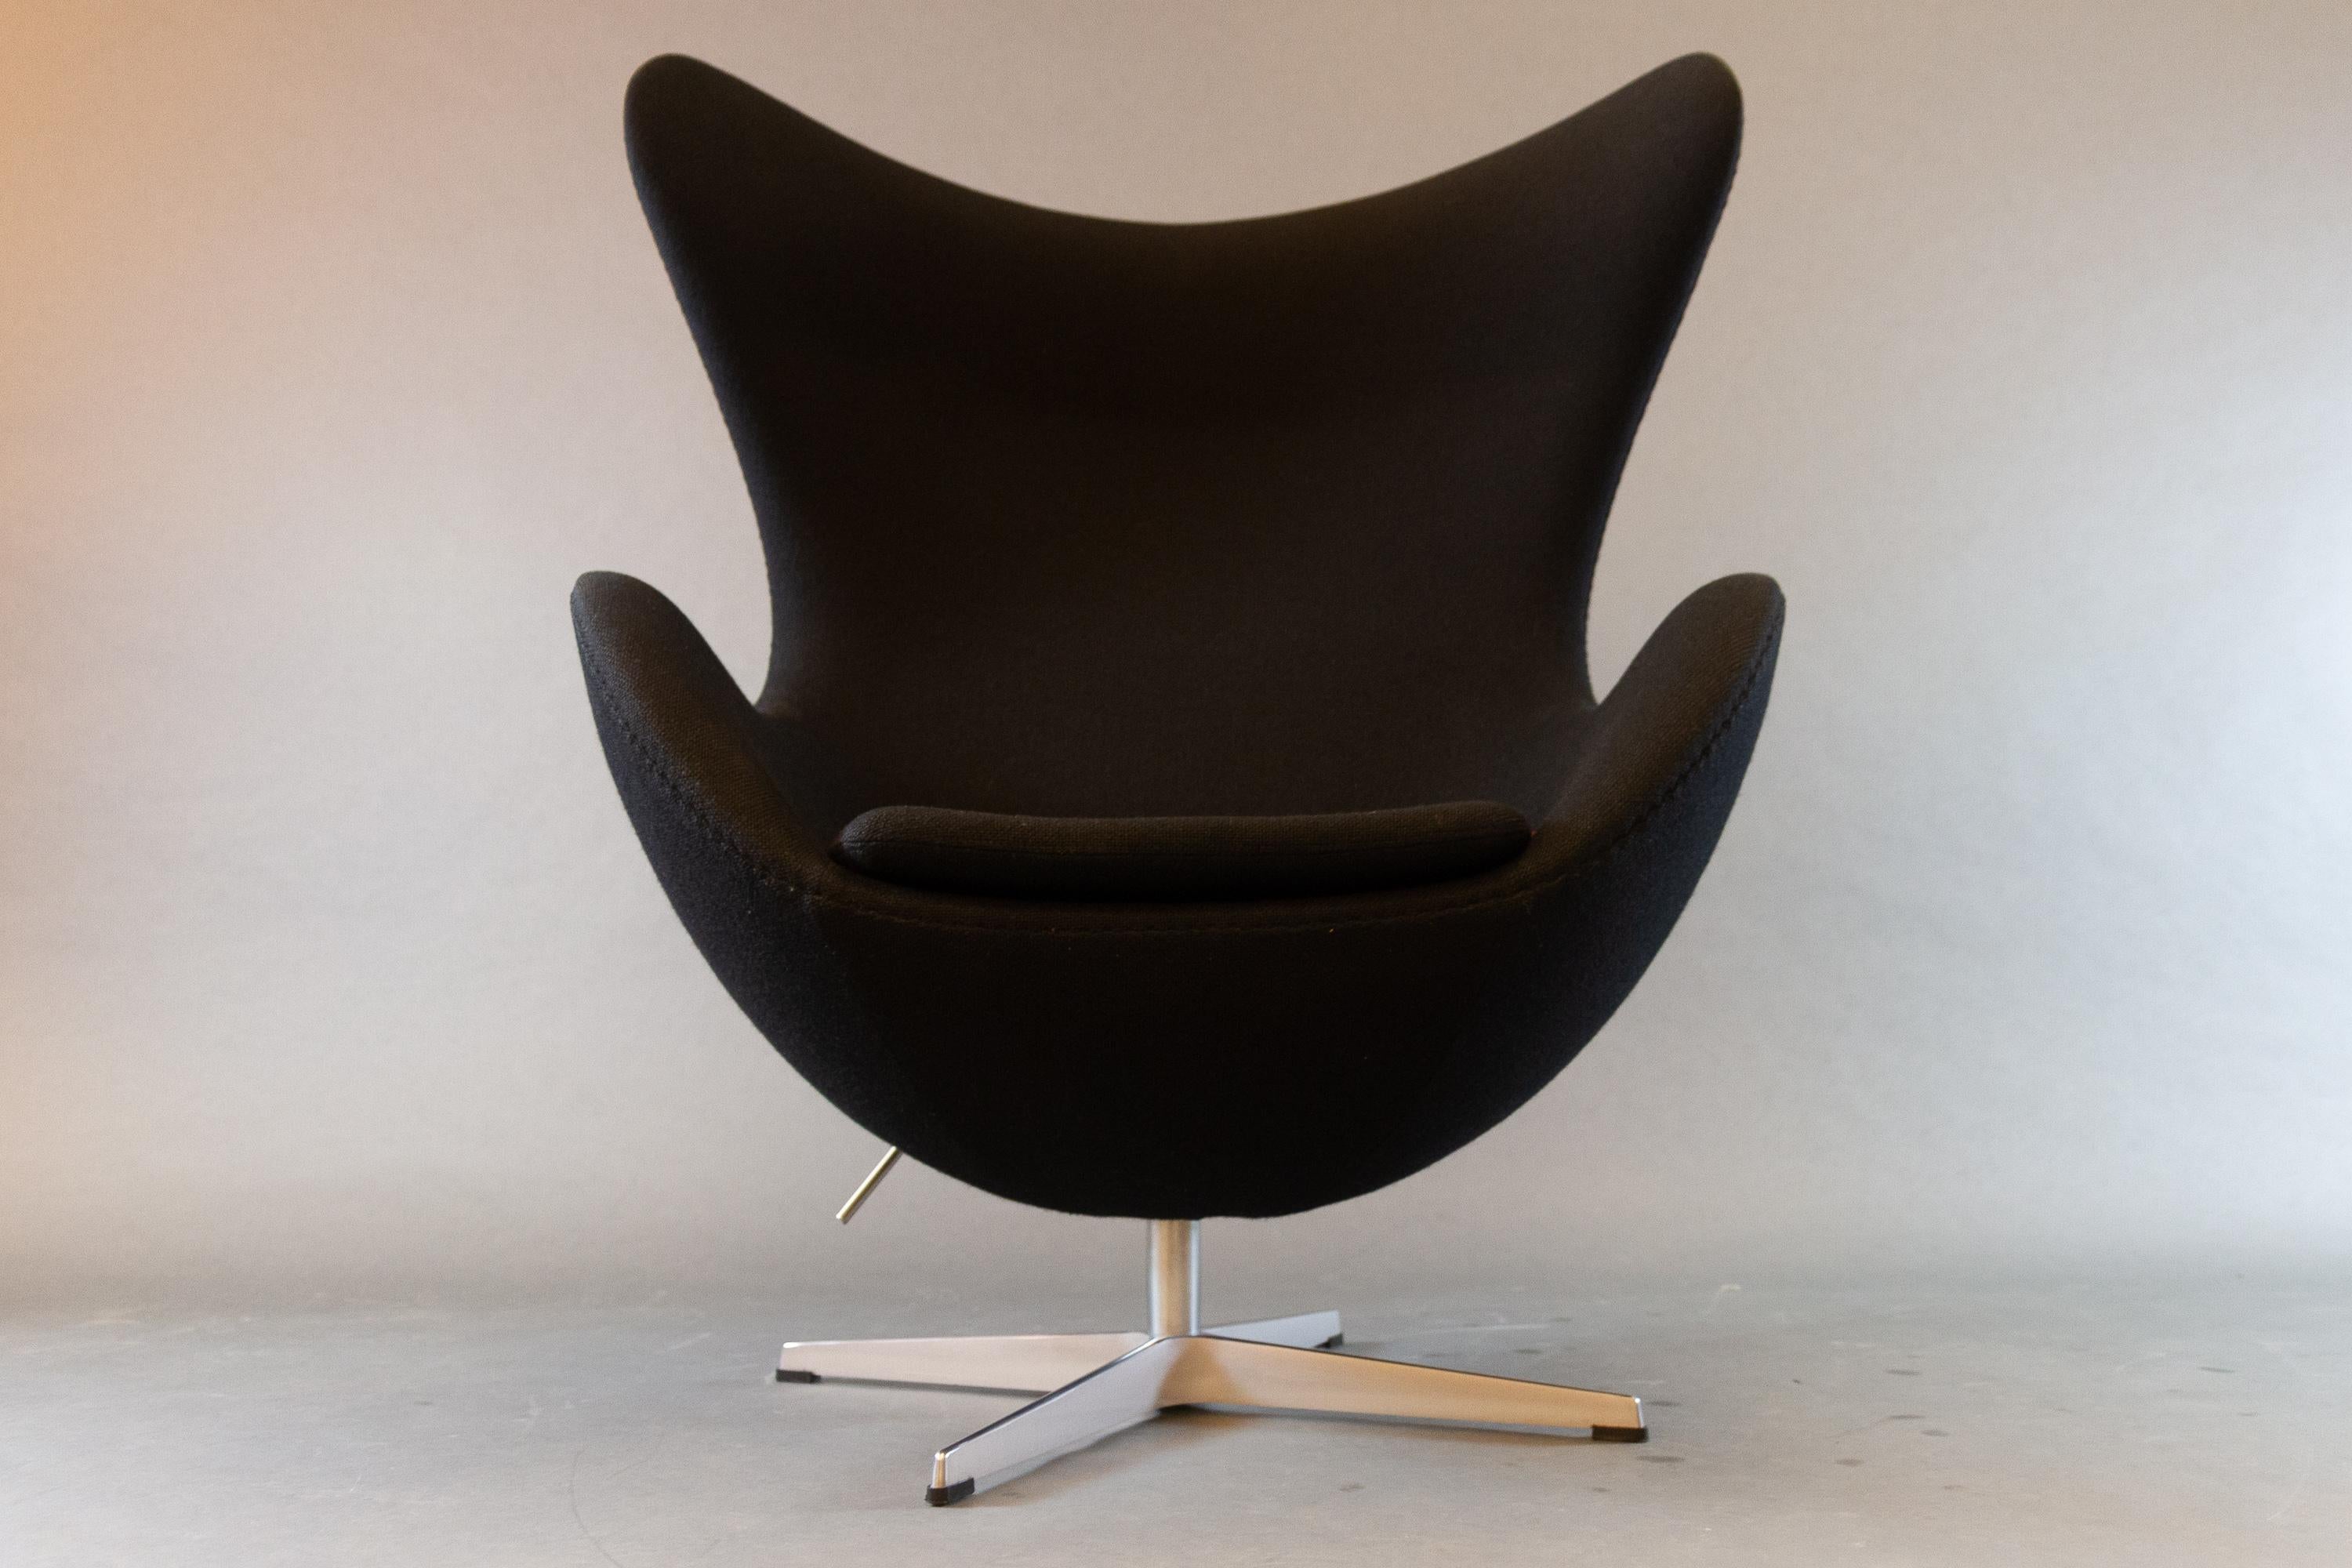 Black egg chair 3316 by Arne Jacobsen for Fritz Hansen, 2007.
This is the single most iconic piece of Danish design ever made. The egg chair model 3316, in Danish 